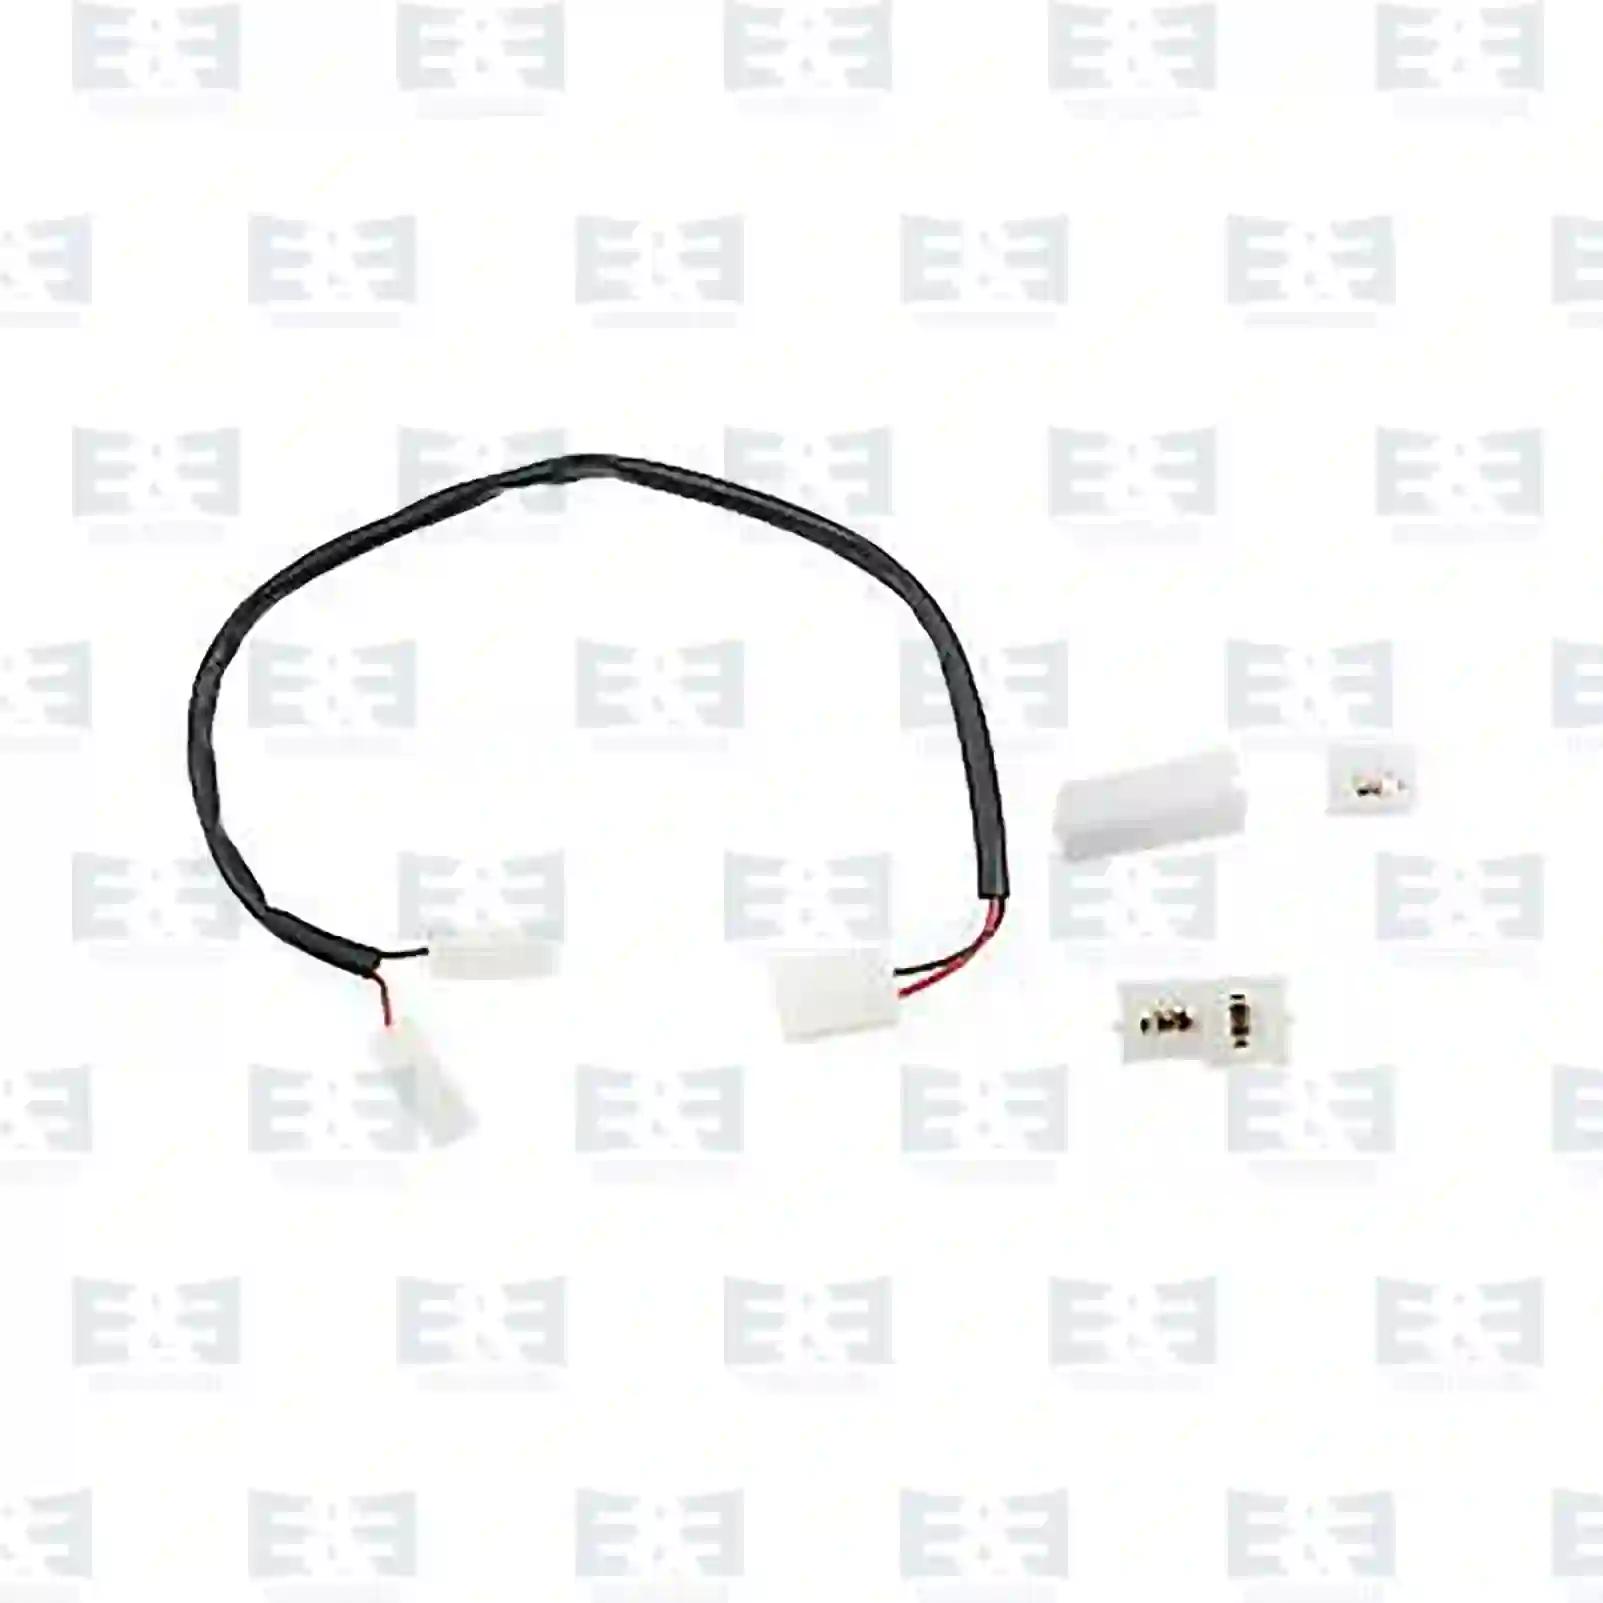  Adapter cable || E&E Truck Spare Parts | Truck Spare Parts, Auotomotive Spare Parts